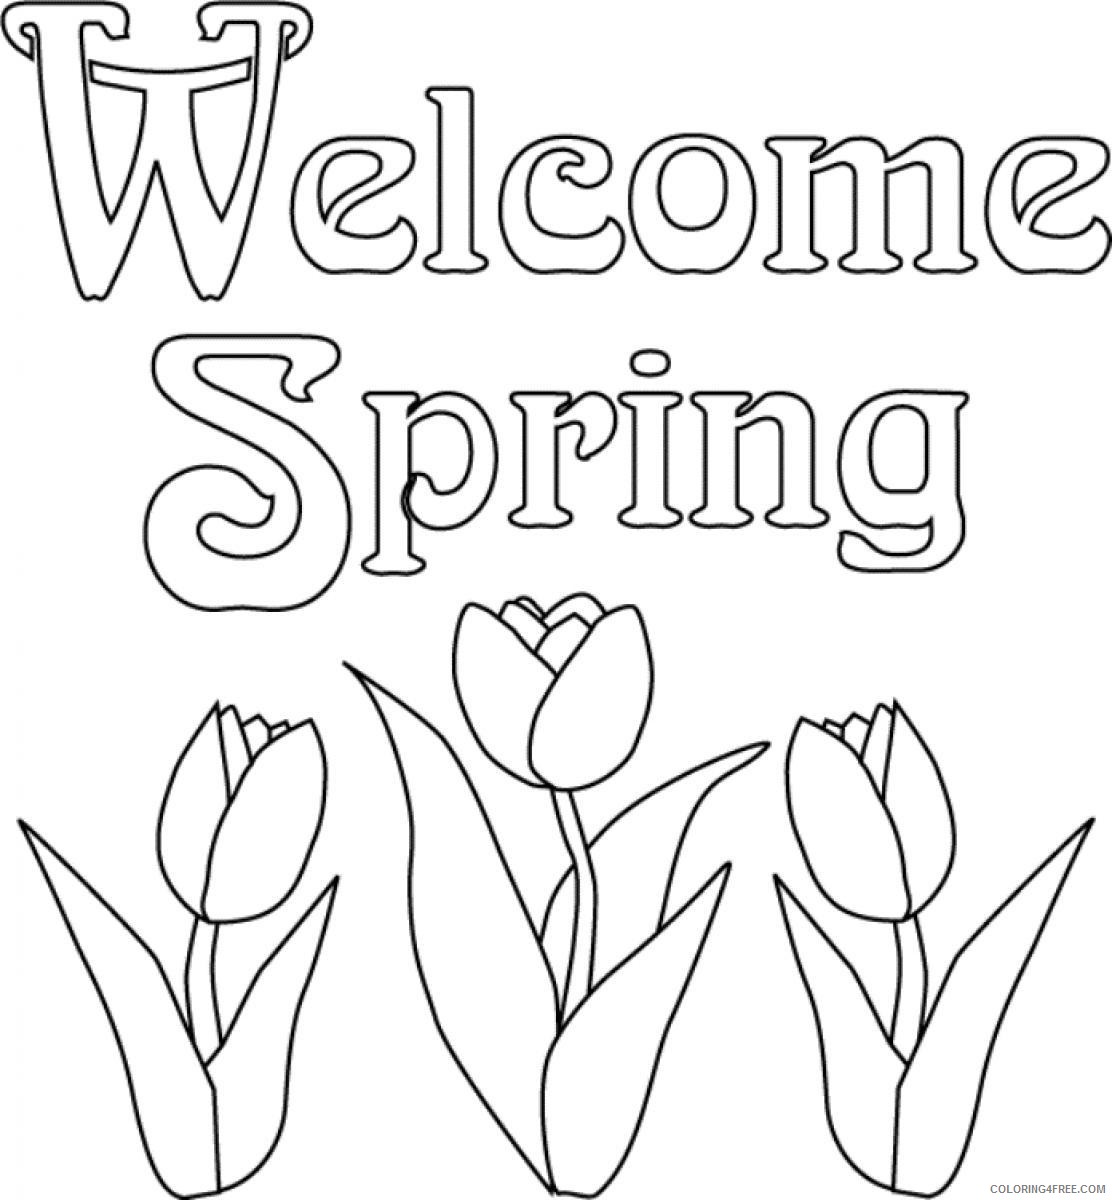 spring coloring pages welcome spring Coloring20free   Coloring20Free.com